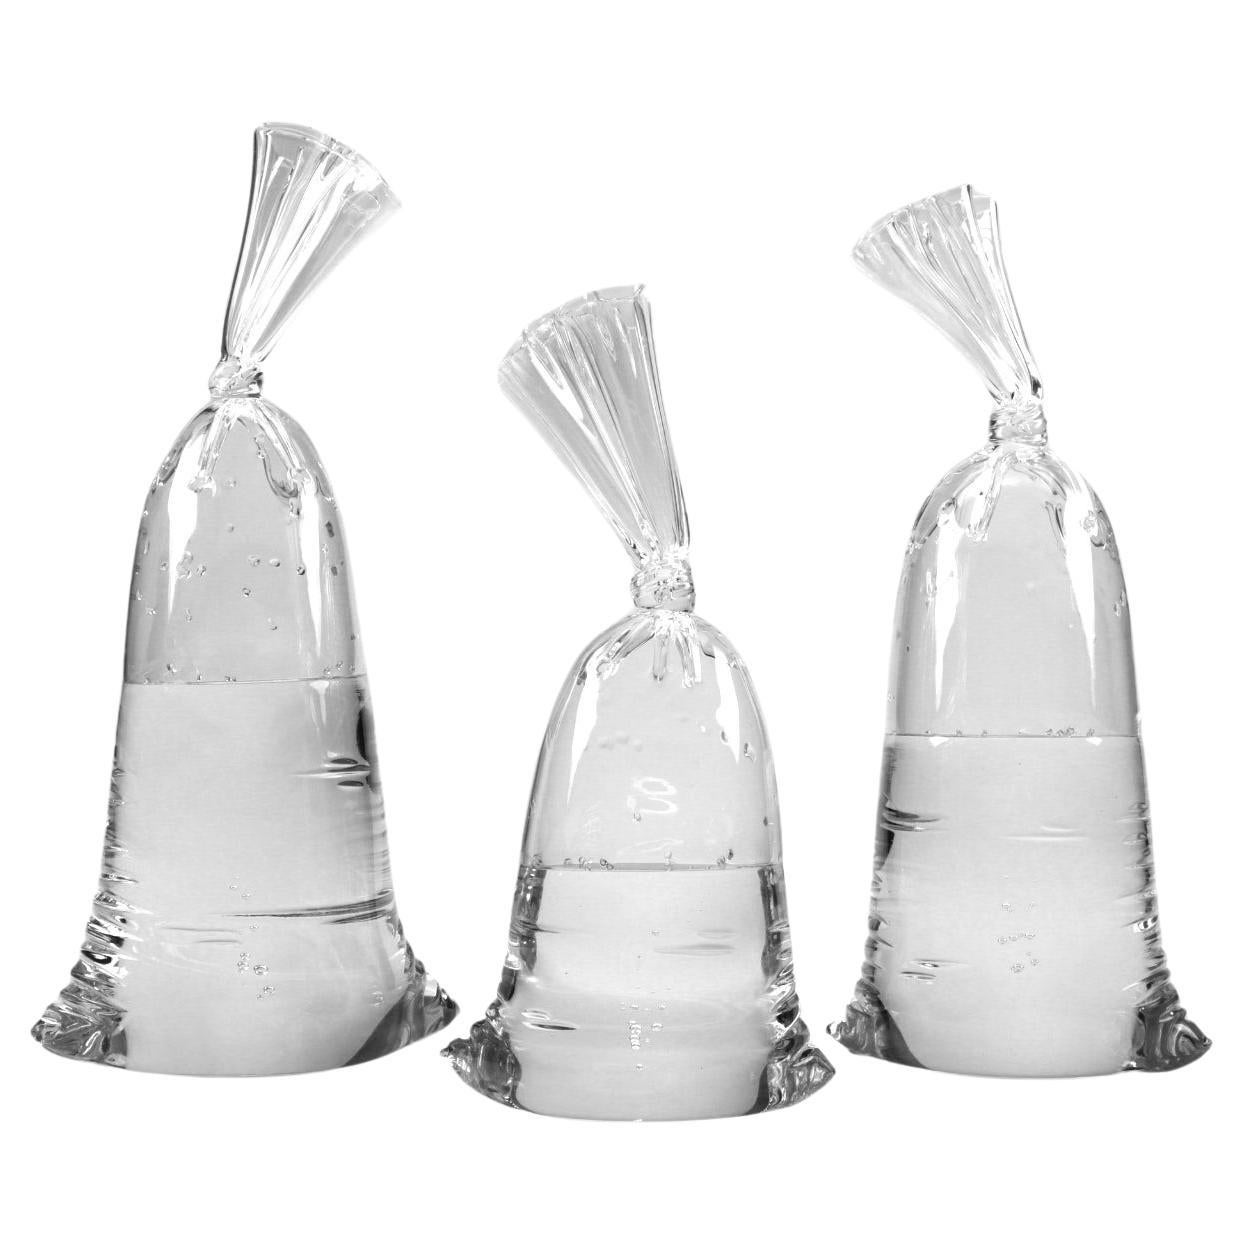 Hyperreal glass water bag sculpture trio For Sale